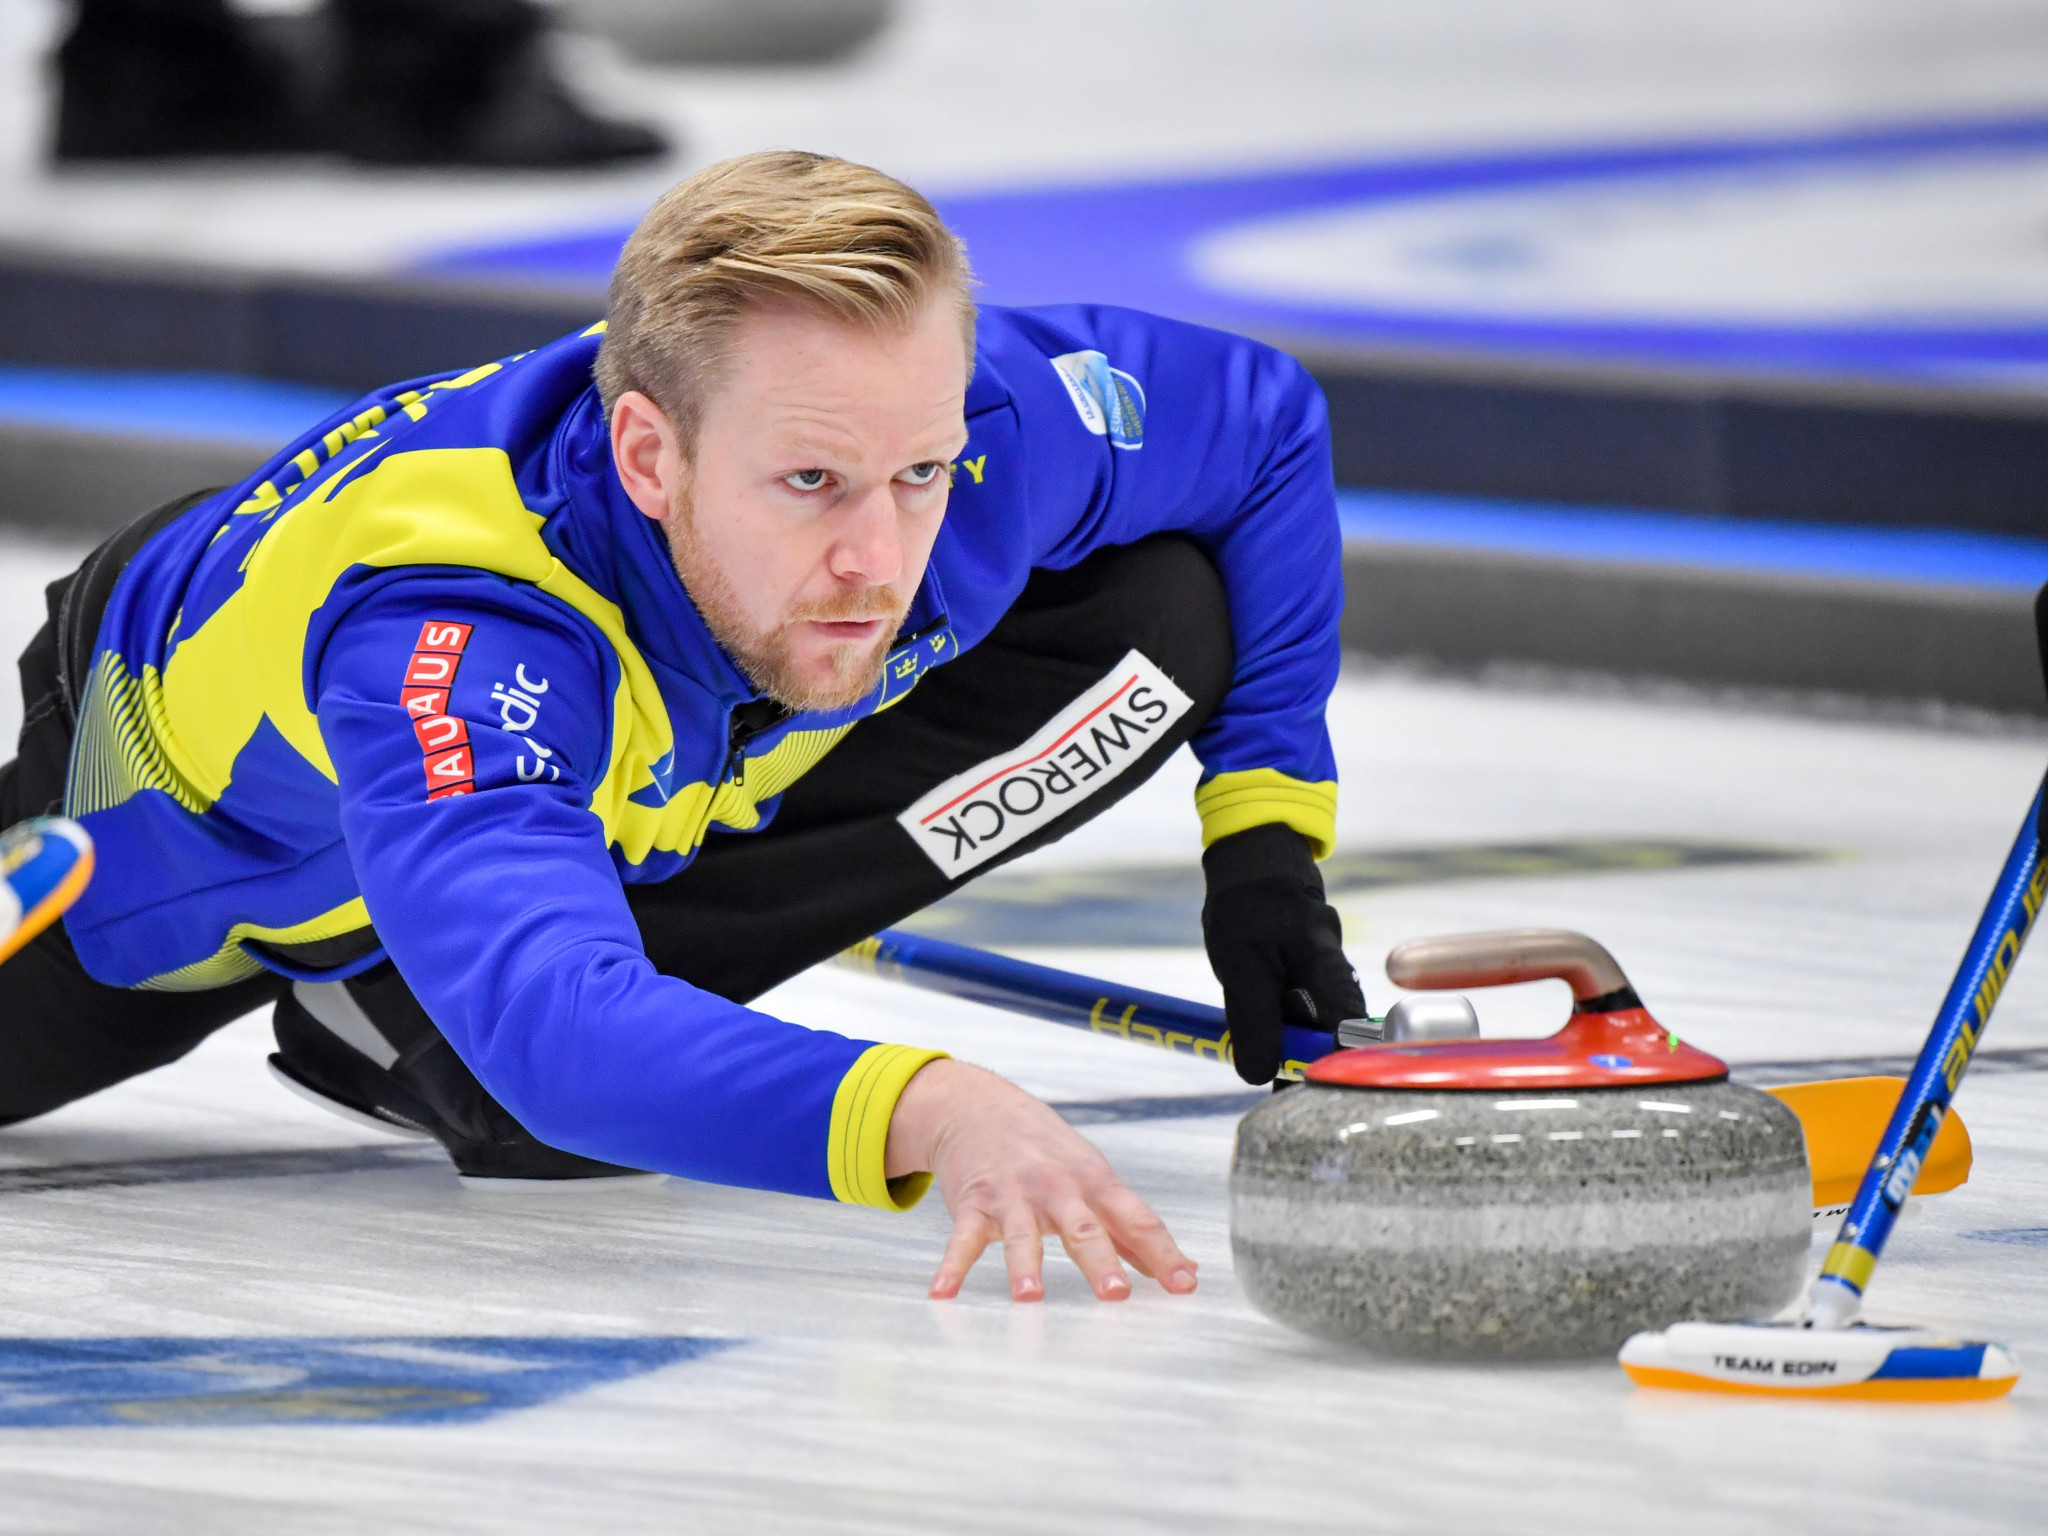 Niklas Edin's rink have won 10 consecutive matches at the European Curling Championships in Helsingborg ©Getty Images